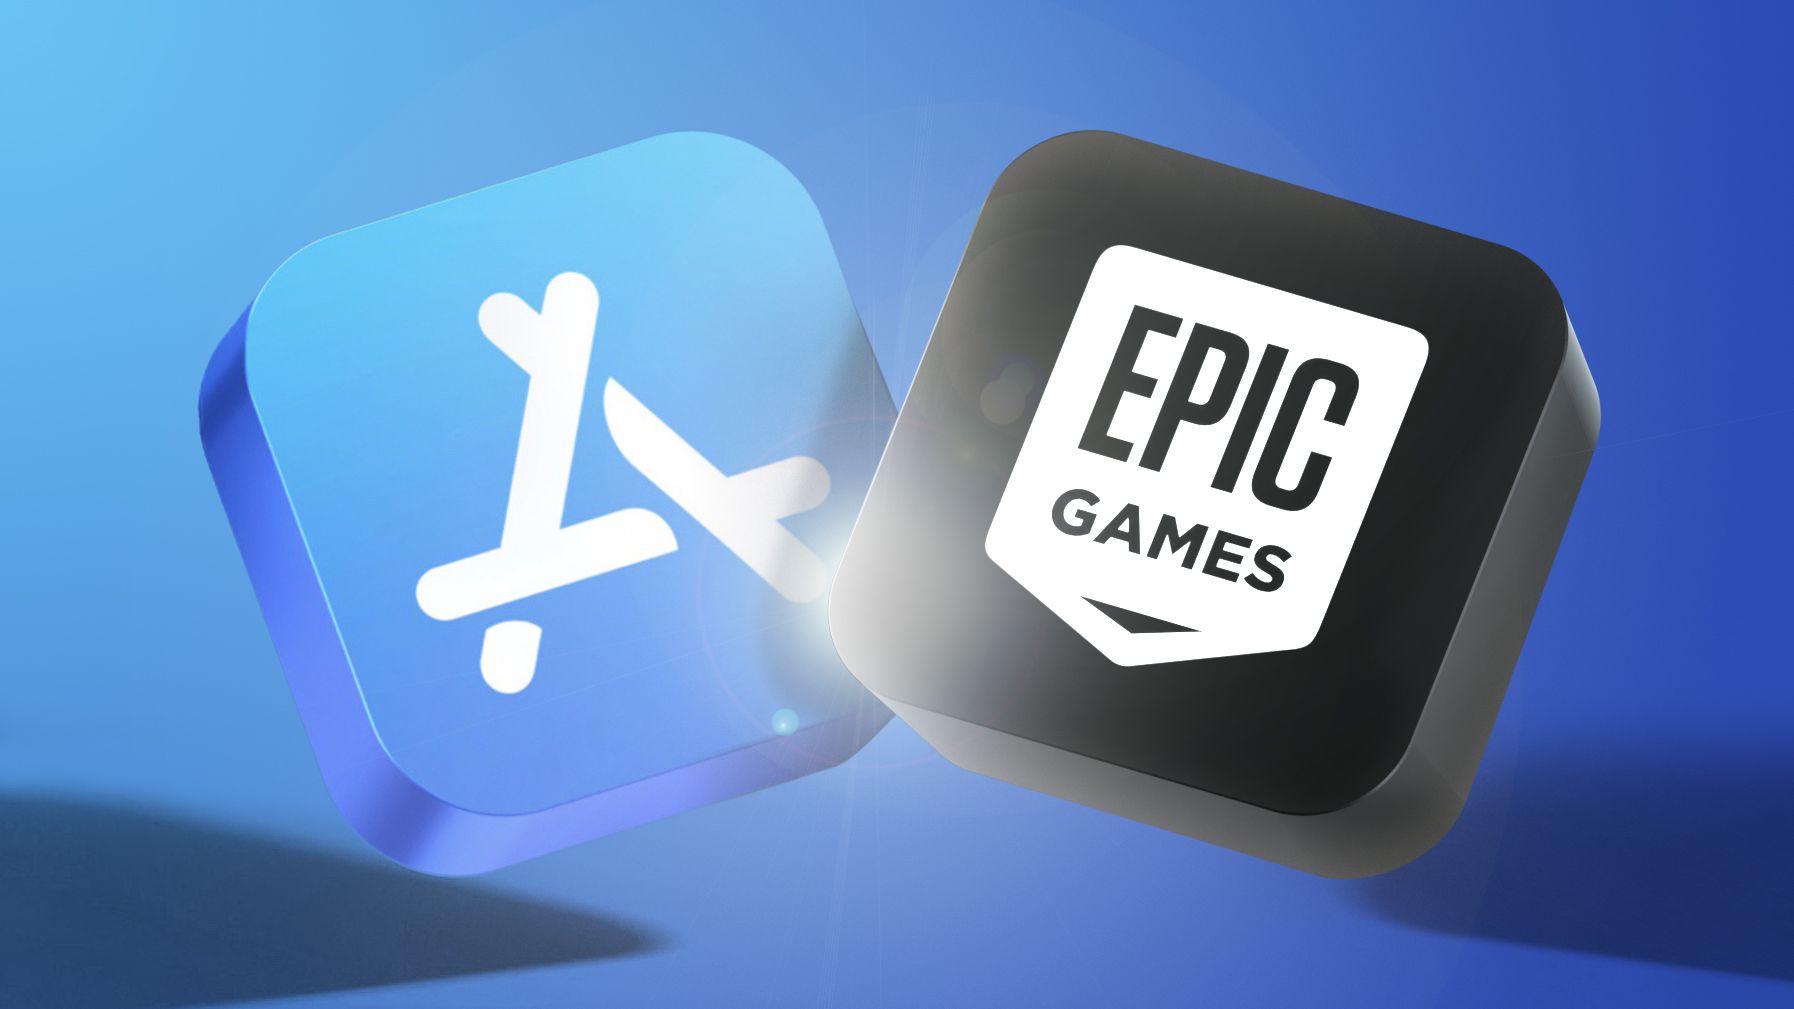 Epic Games Accuses Apple of Charging 'Unjustified Fees' for Required Non-App Store Purchase Link